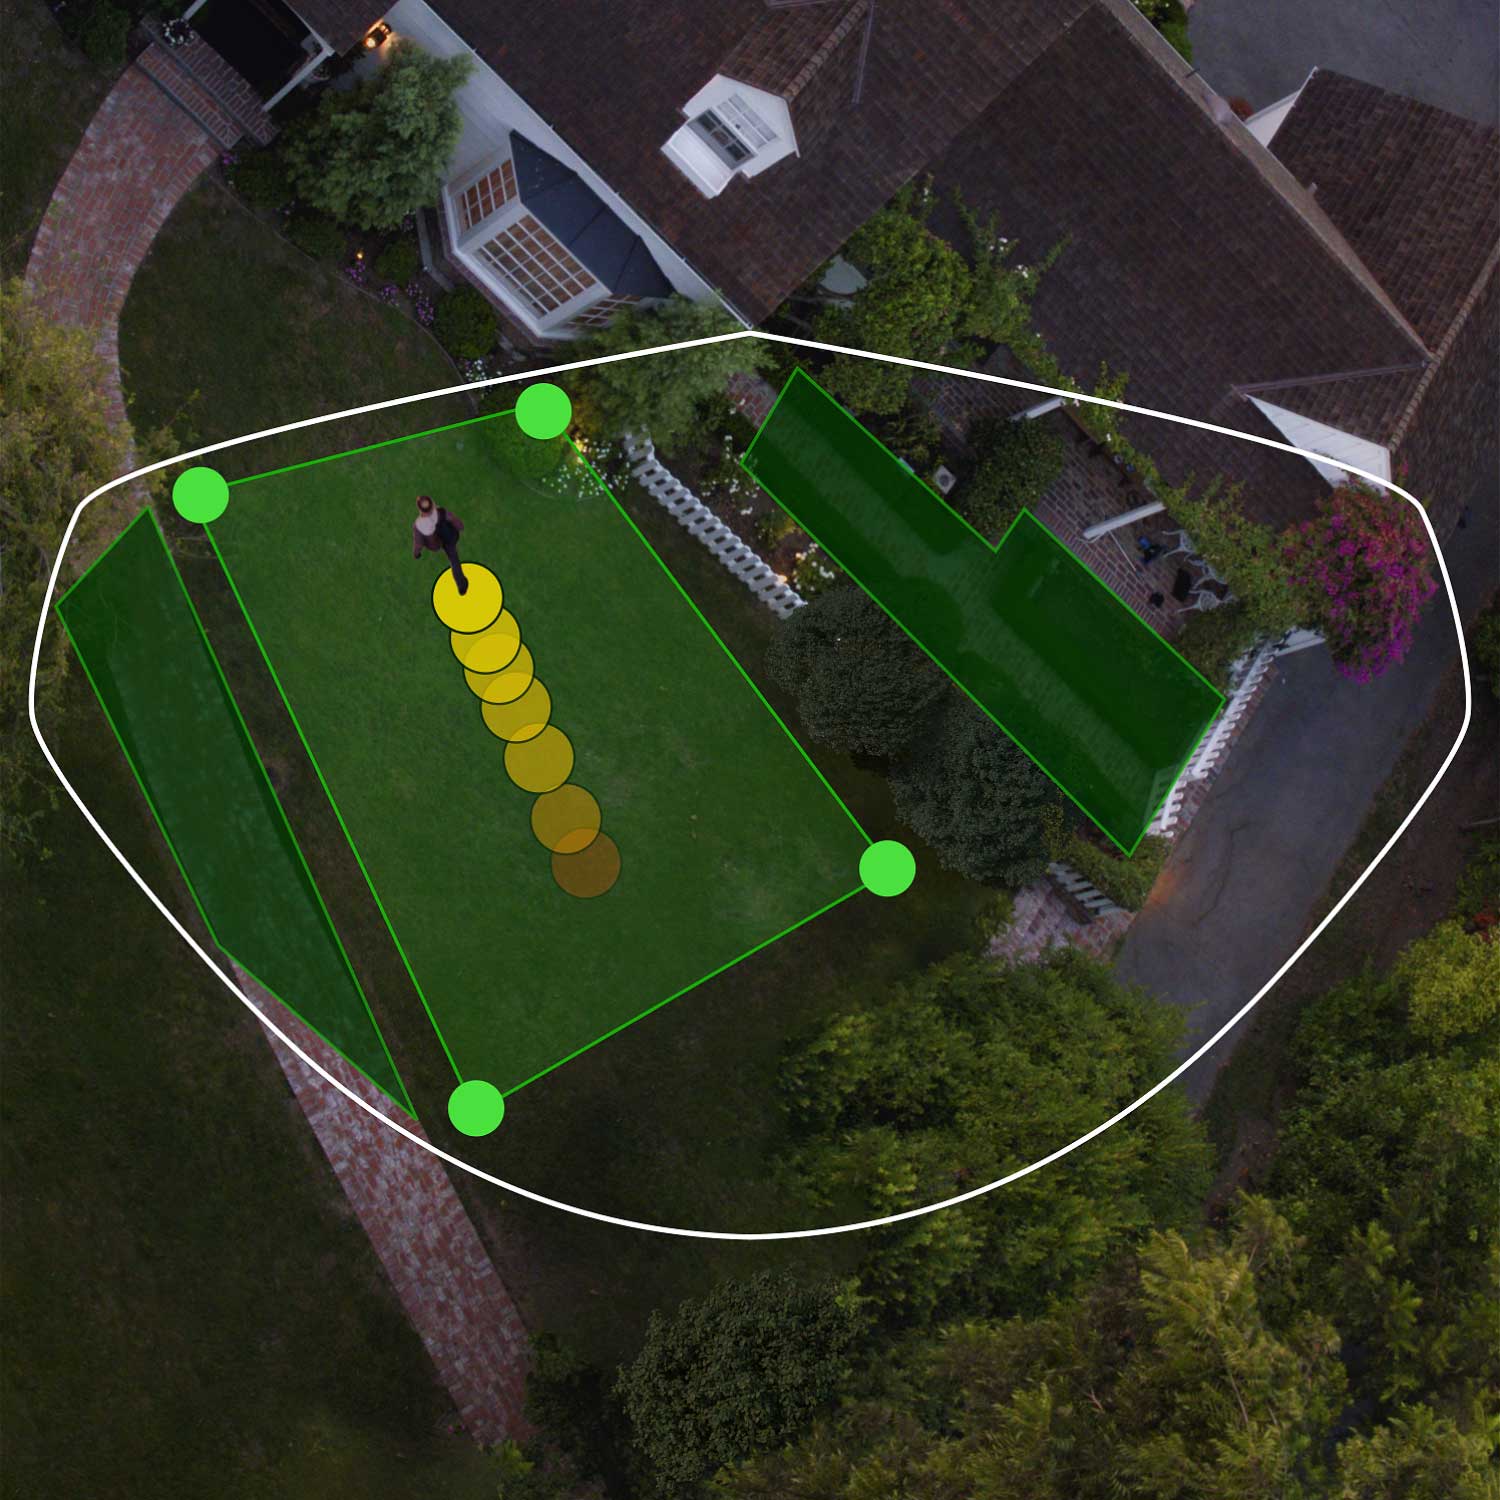 Spotlight Cam Pro (Solar) - Aerial view of front of house showing bird's eye view zones in green. Person walks toward front door, their path indicated by yellow dots.